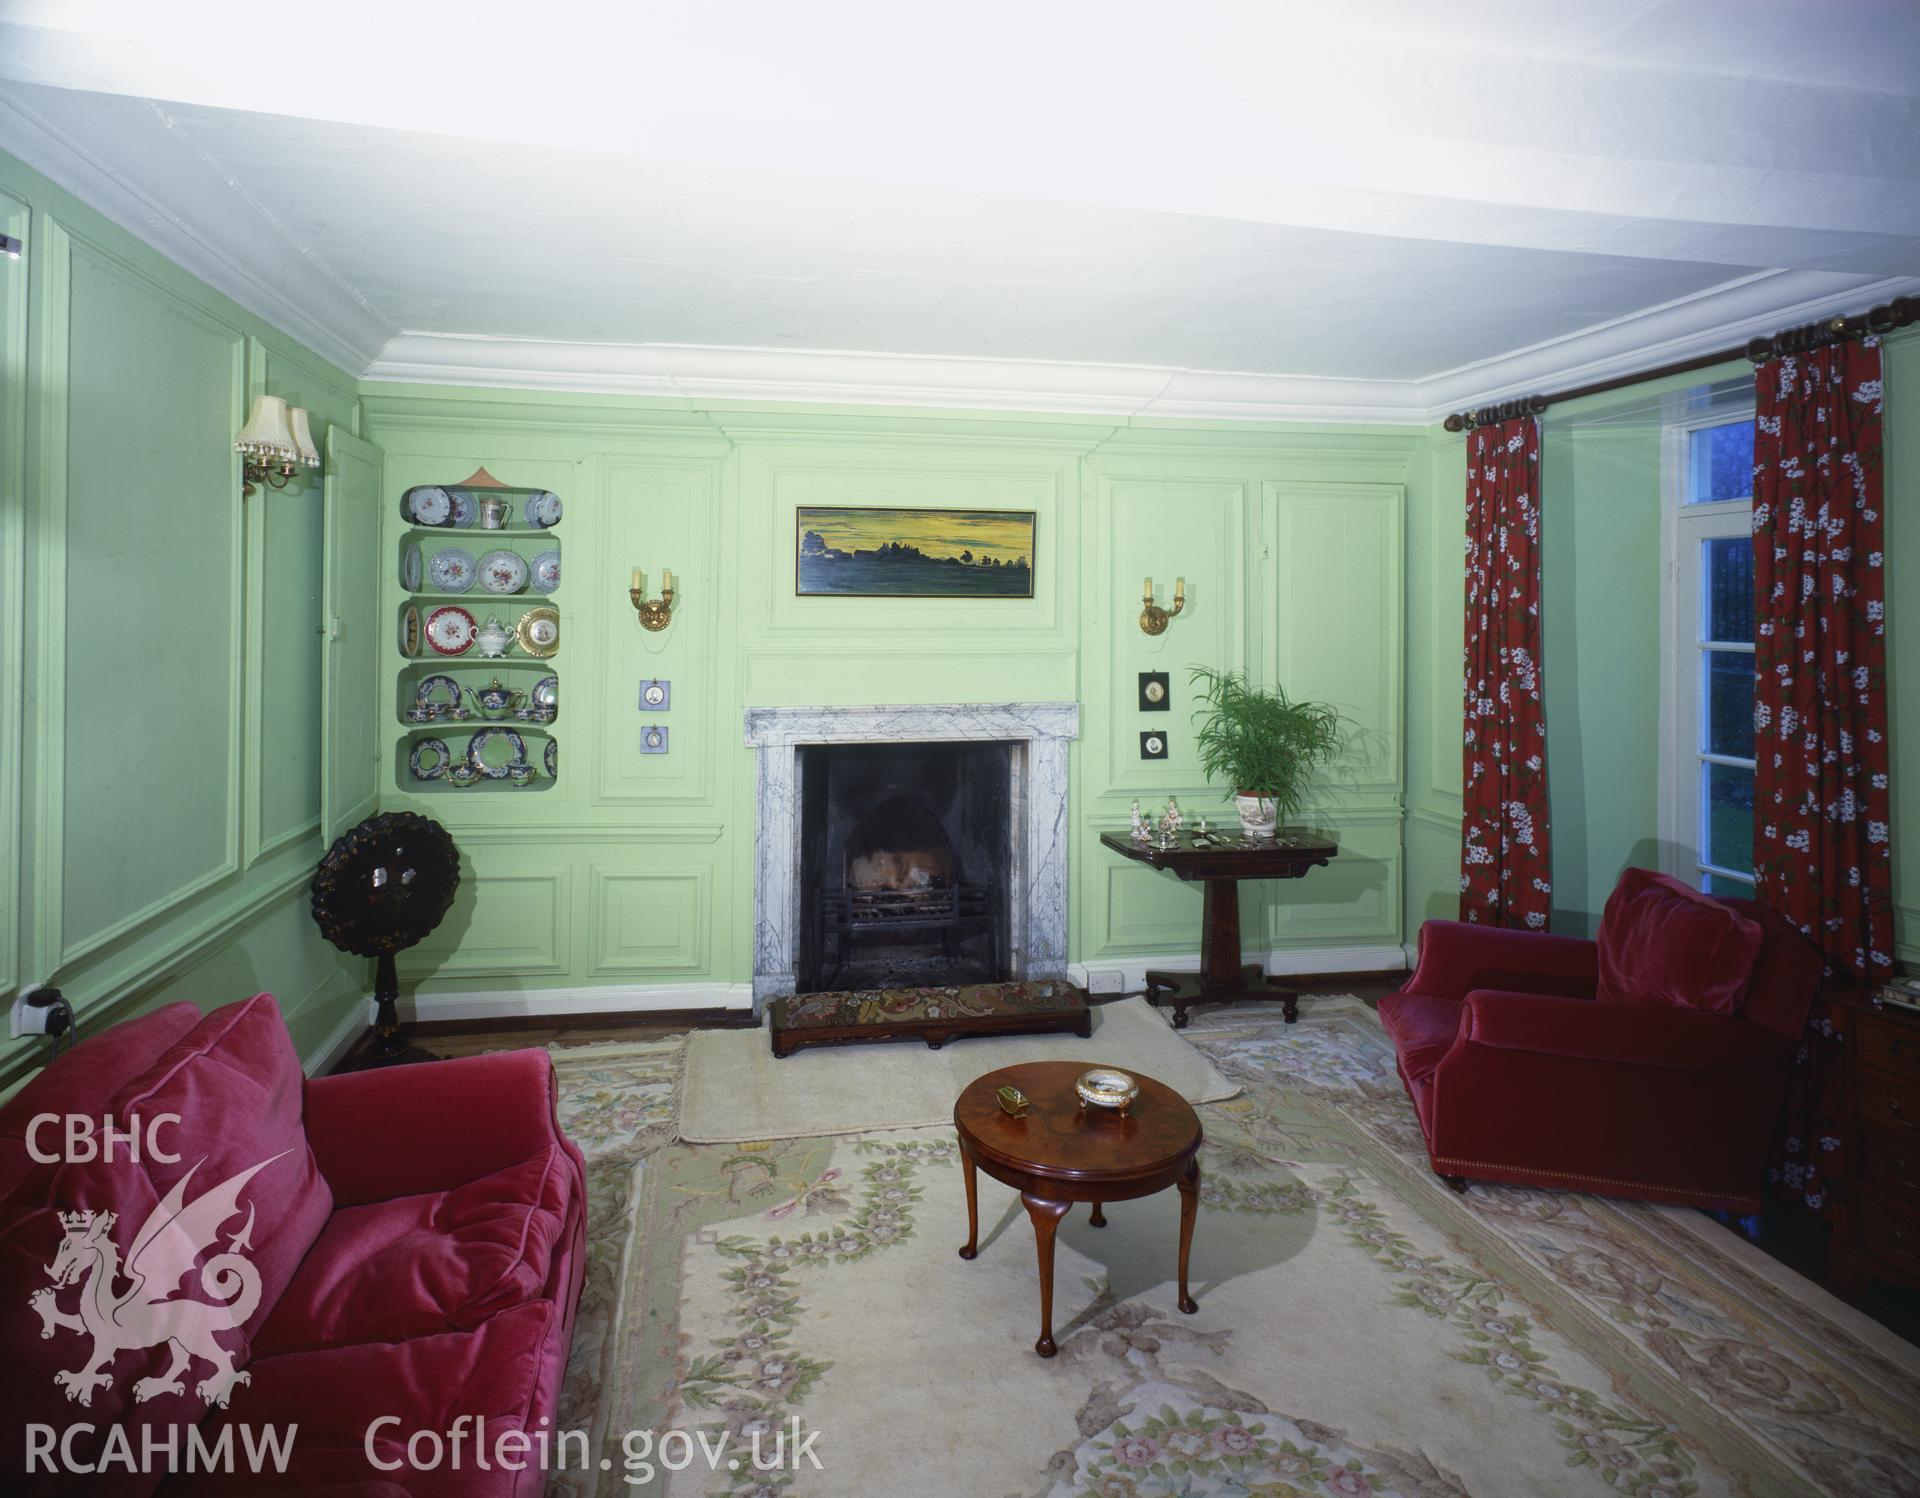 RCAHMW colour transparency showing the drawing room at Great House, Llanblethian.